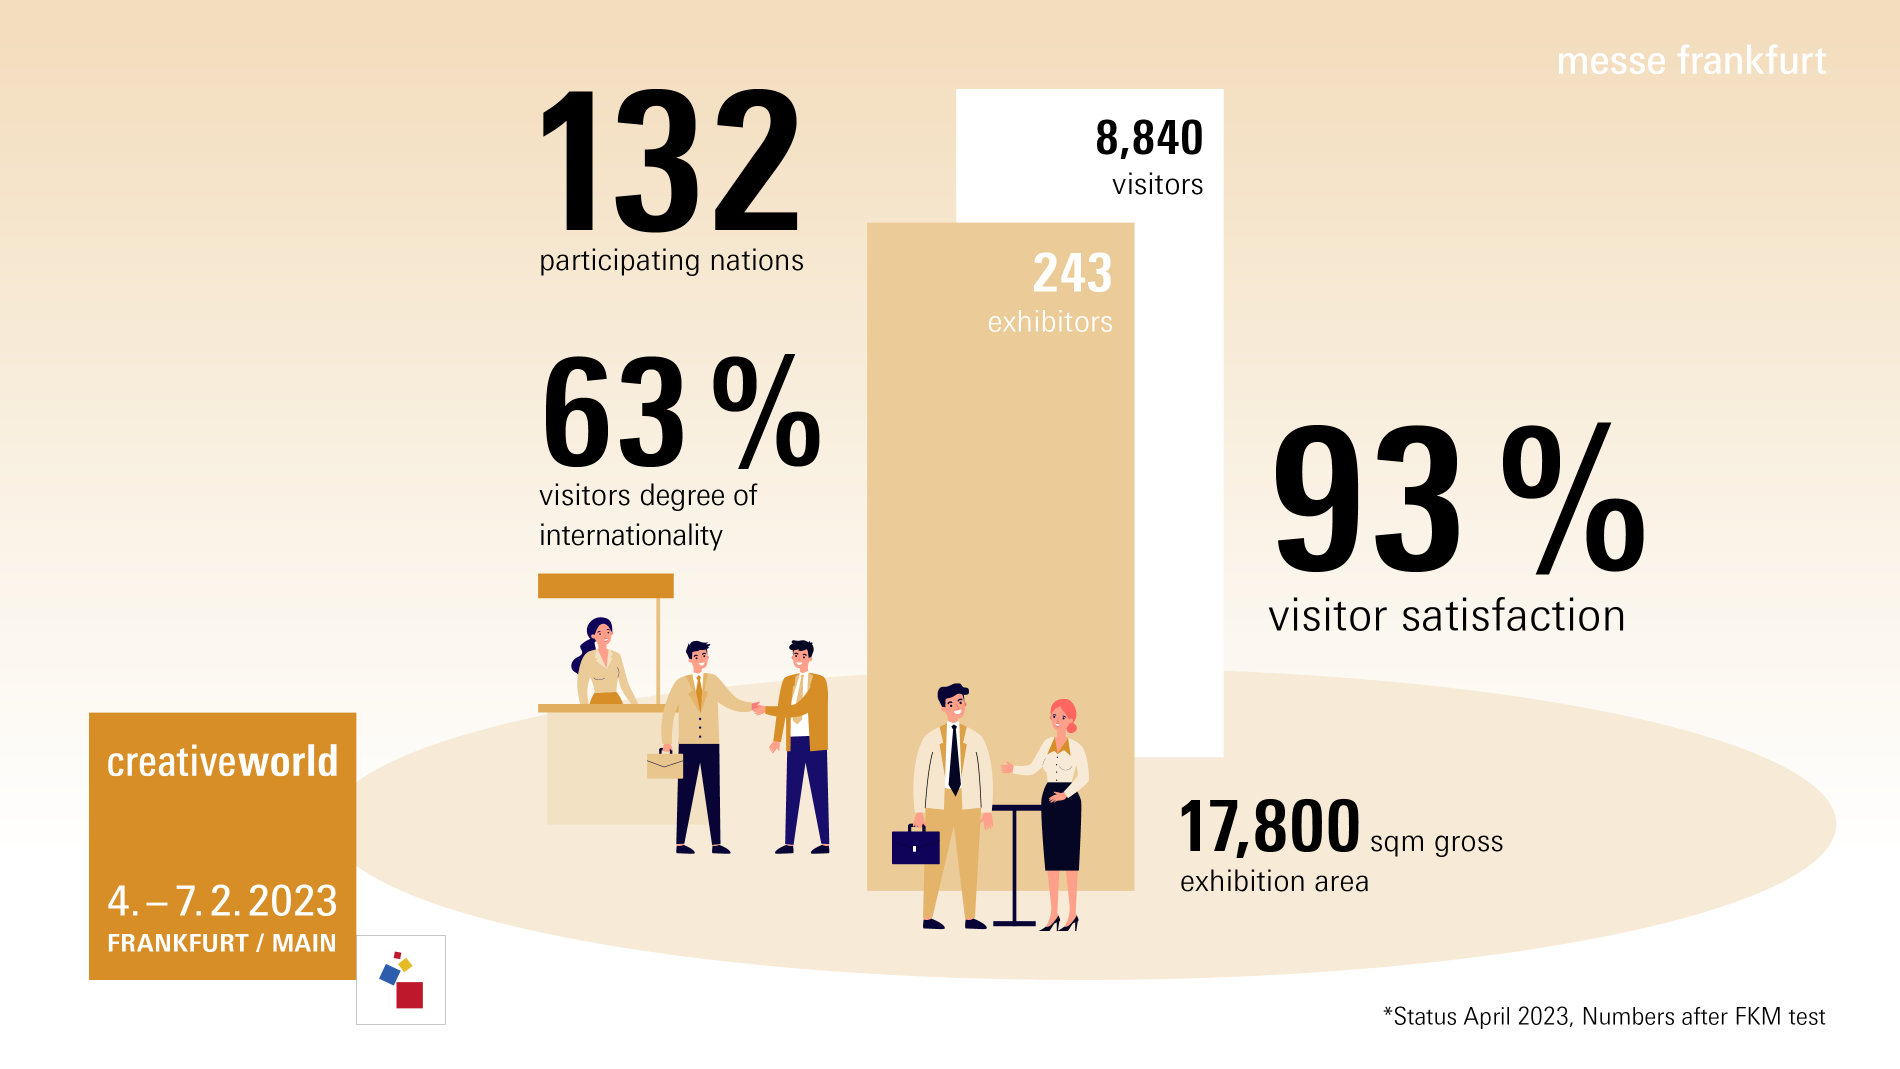 numbers of visitors and exhibitor at Creativeworld 2023